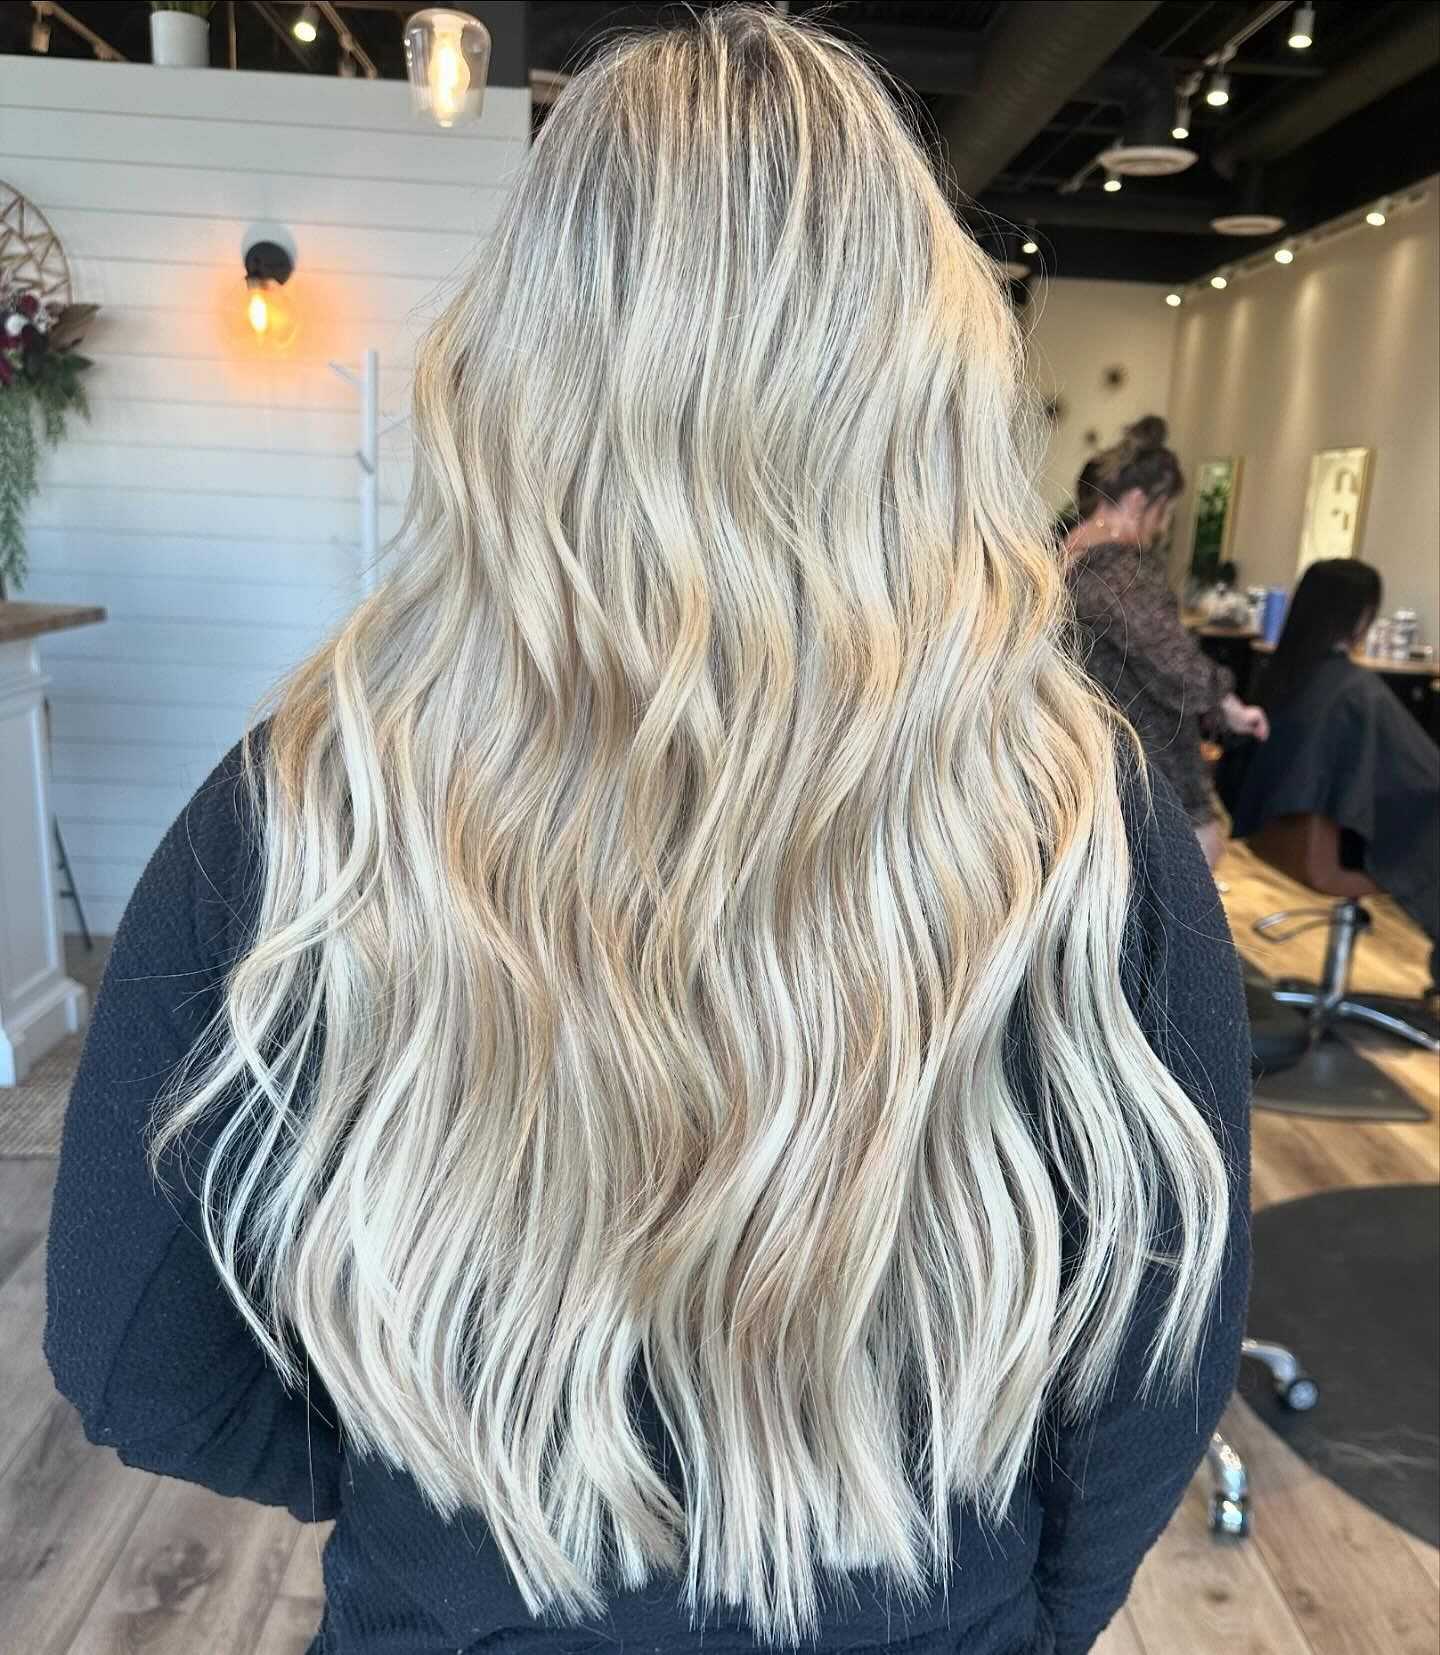 Woman with long, wavy blonde hair showcased in a salon.